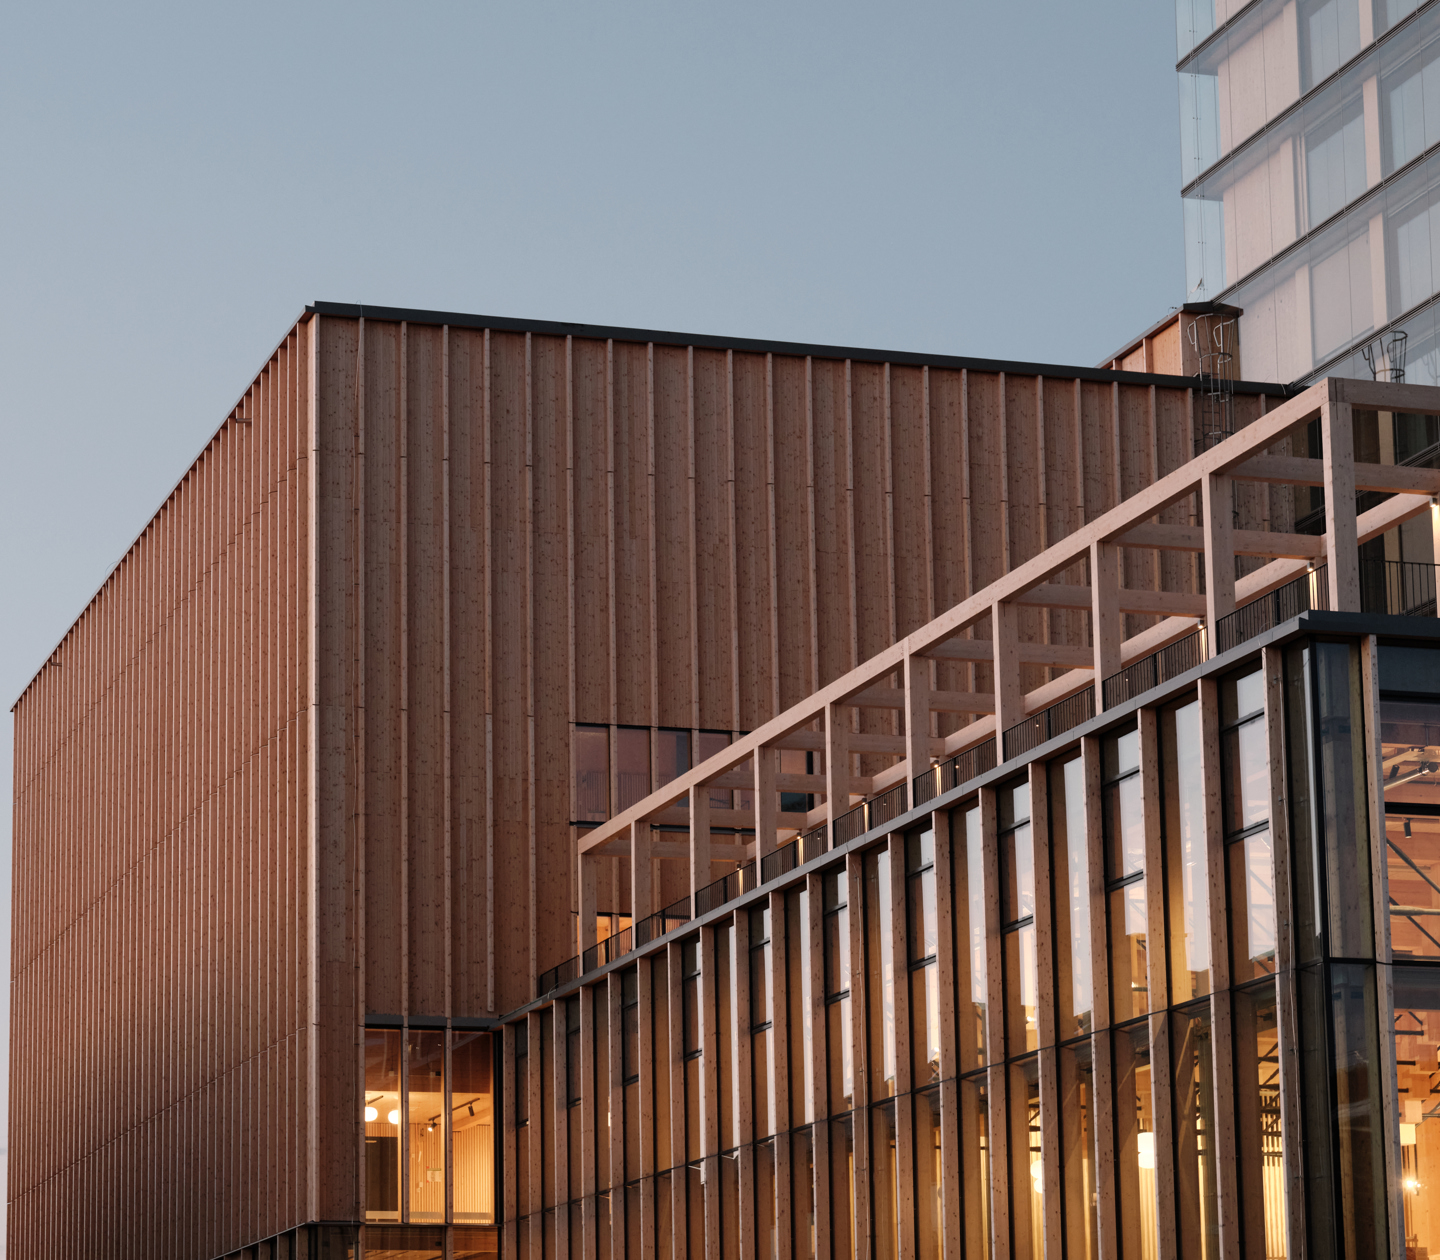 The facade of The Wood Elite by Elite at dusk with indoor lights on